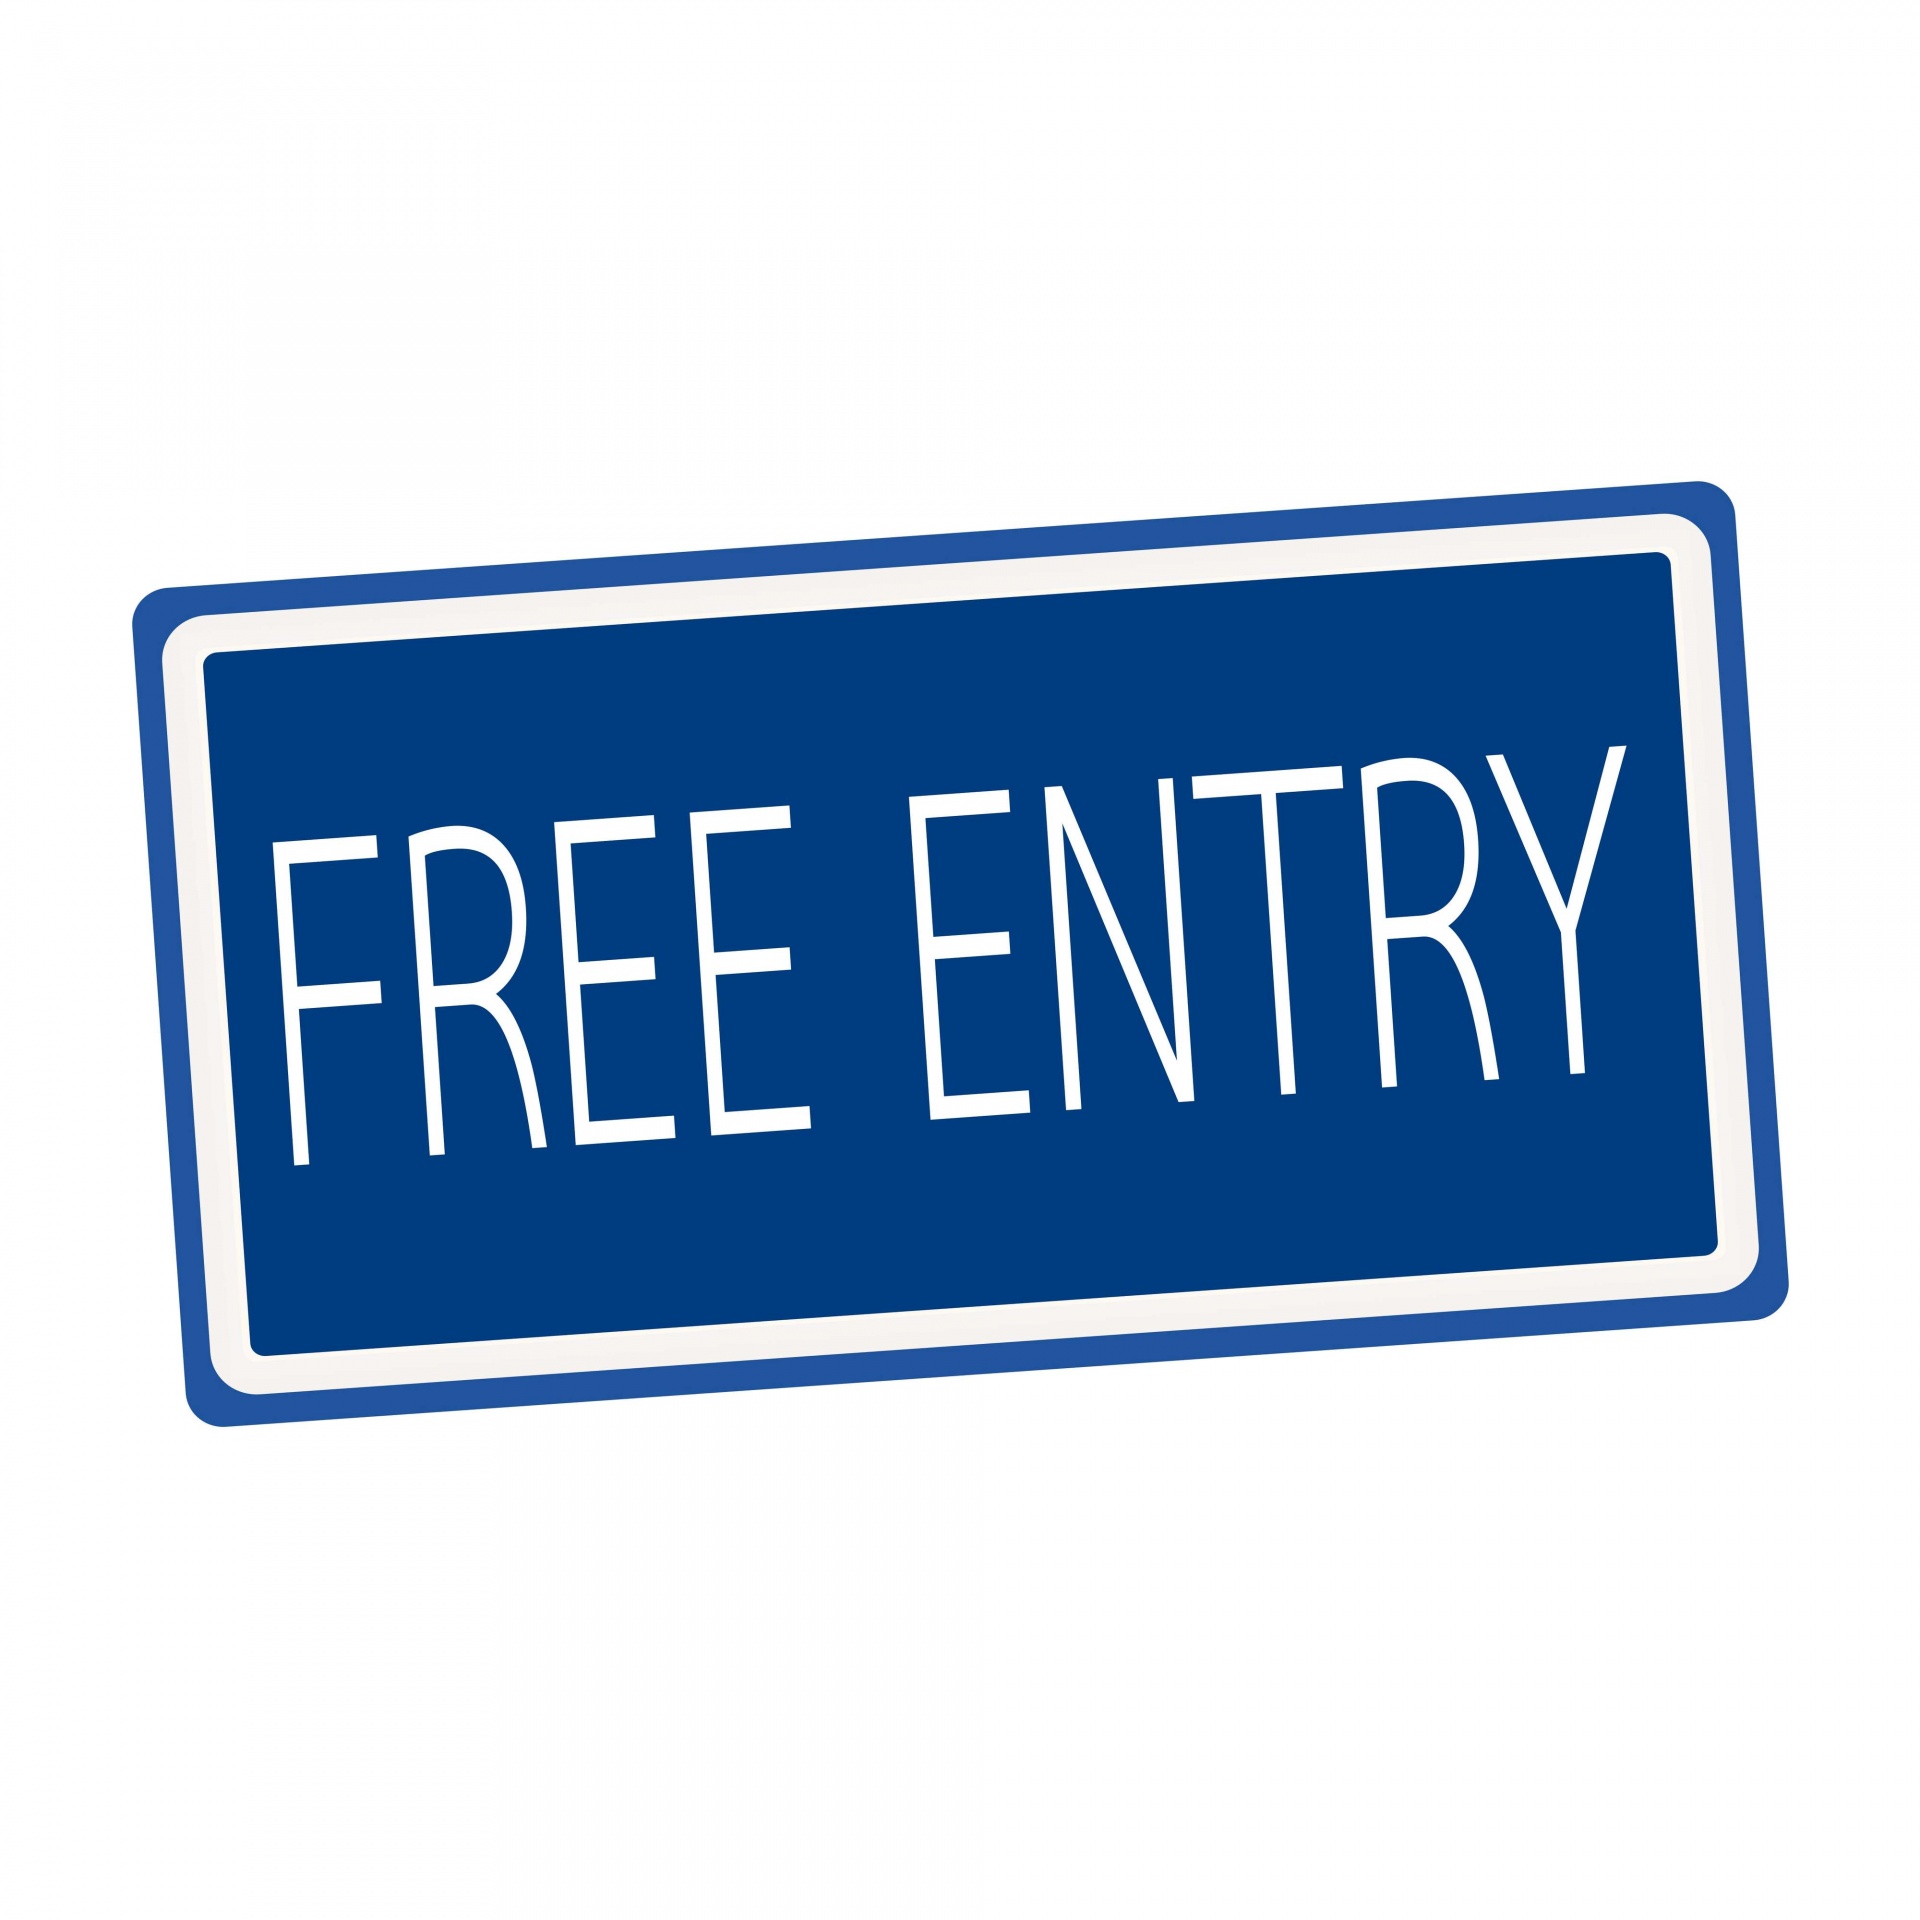 Free Entry White Stamp Text On Blue